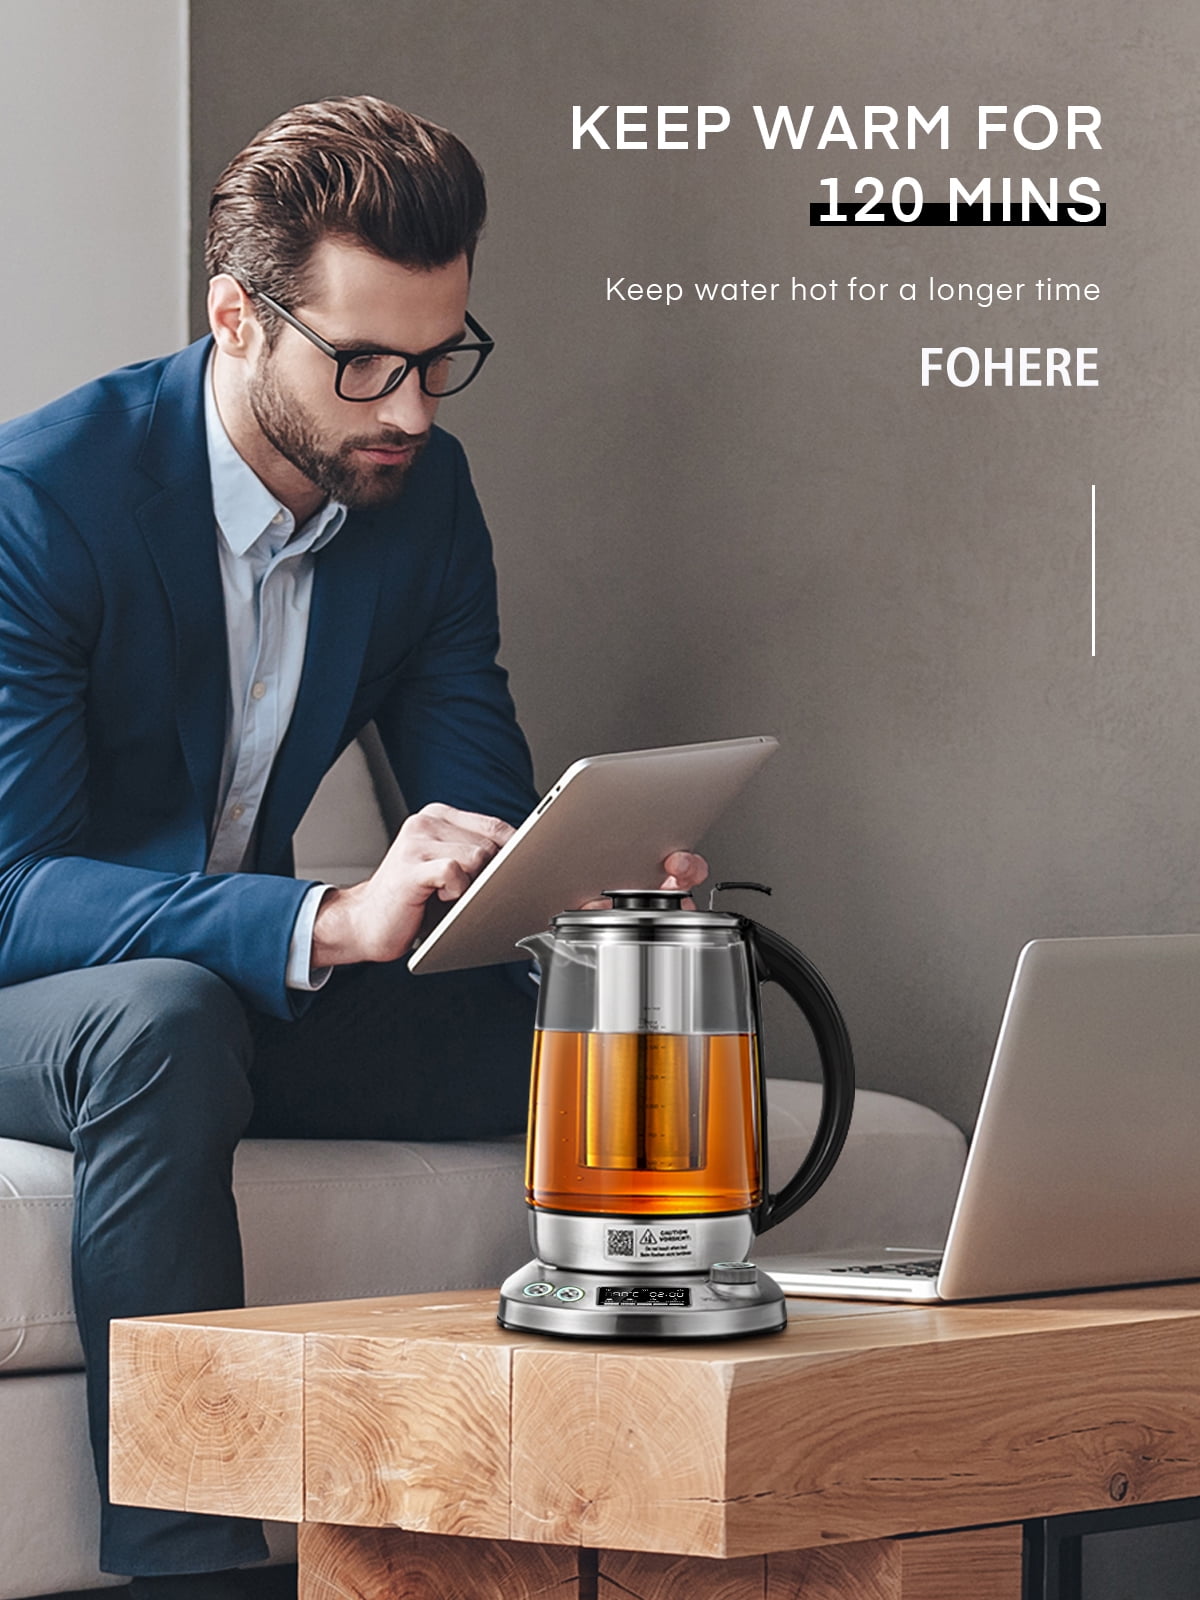 FOHERE Electric Tea Kettle, Electric Kettle Temperature Control with 9  Presets, 2Hr Keep Warm, Removable Tea Infuser,Silver Stainless Steel Glass  Boiler, BPA Free, 1.7L 